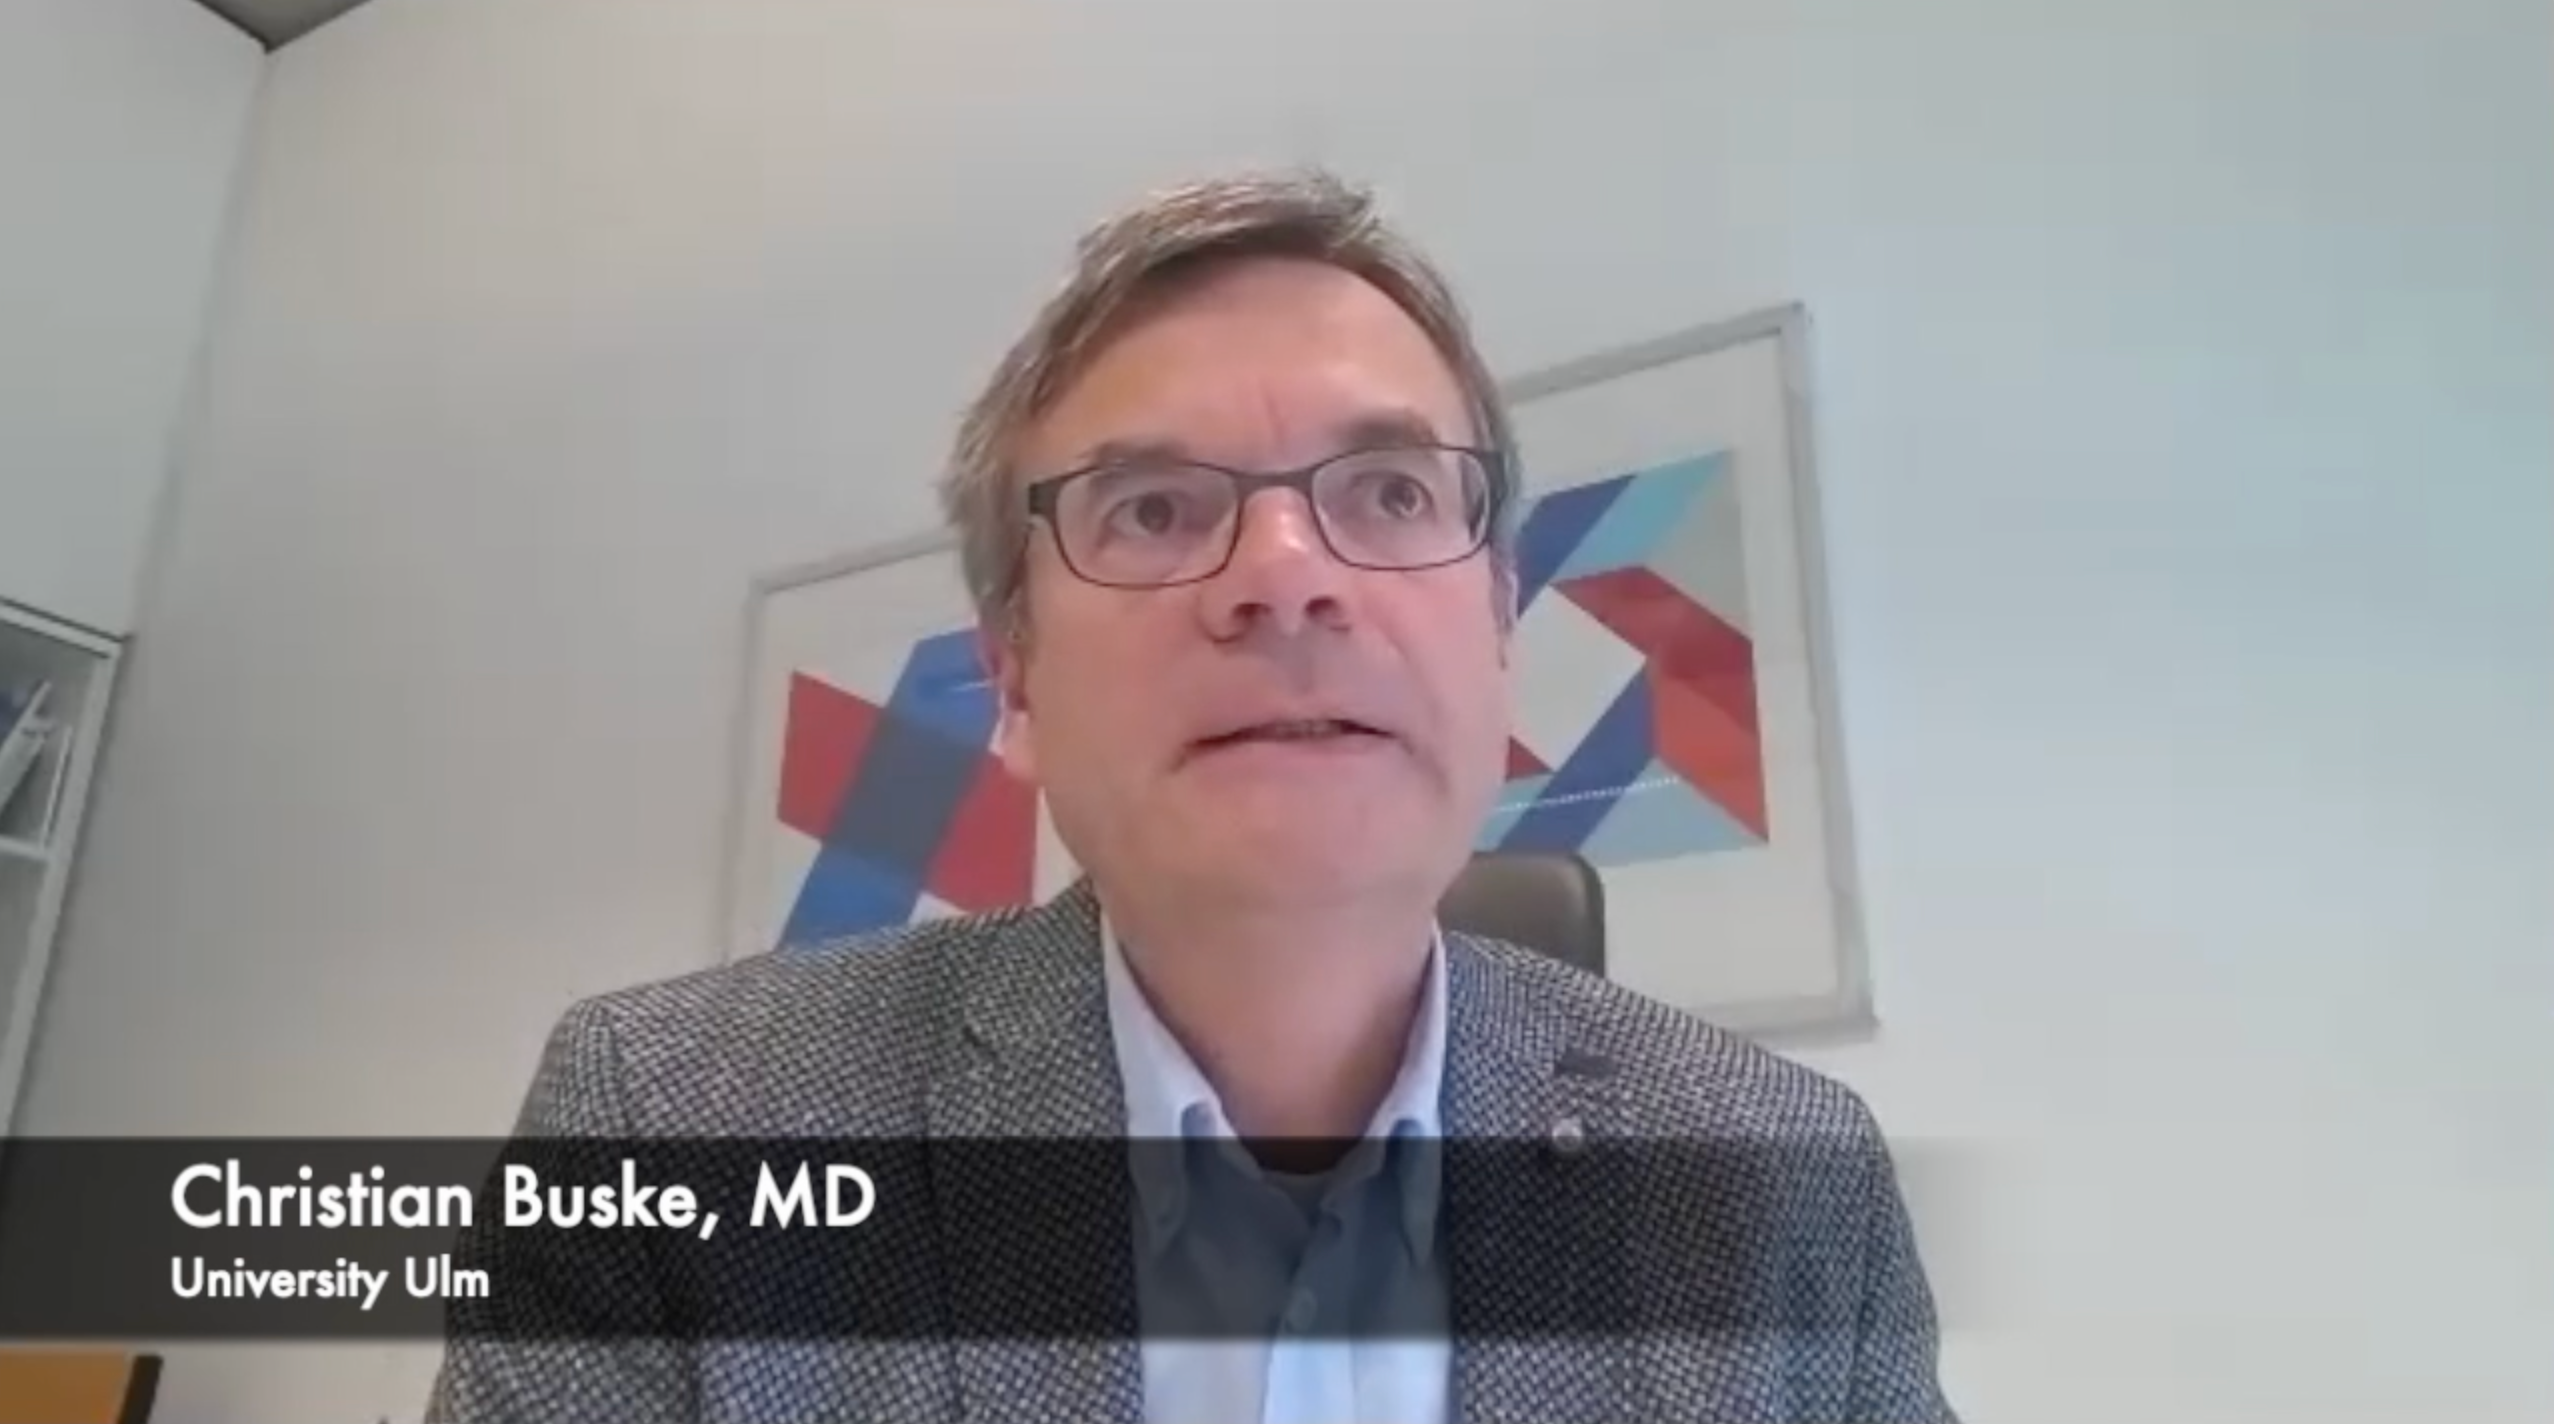 Christian Buske, MD, on the Influence of CAR T-Cells Being Presented at ASH